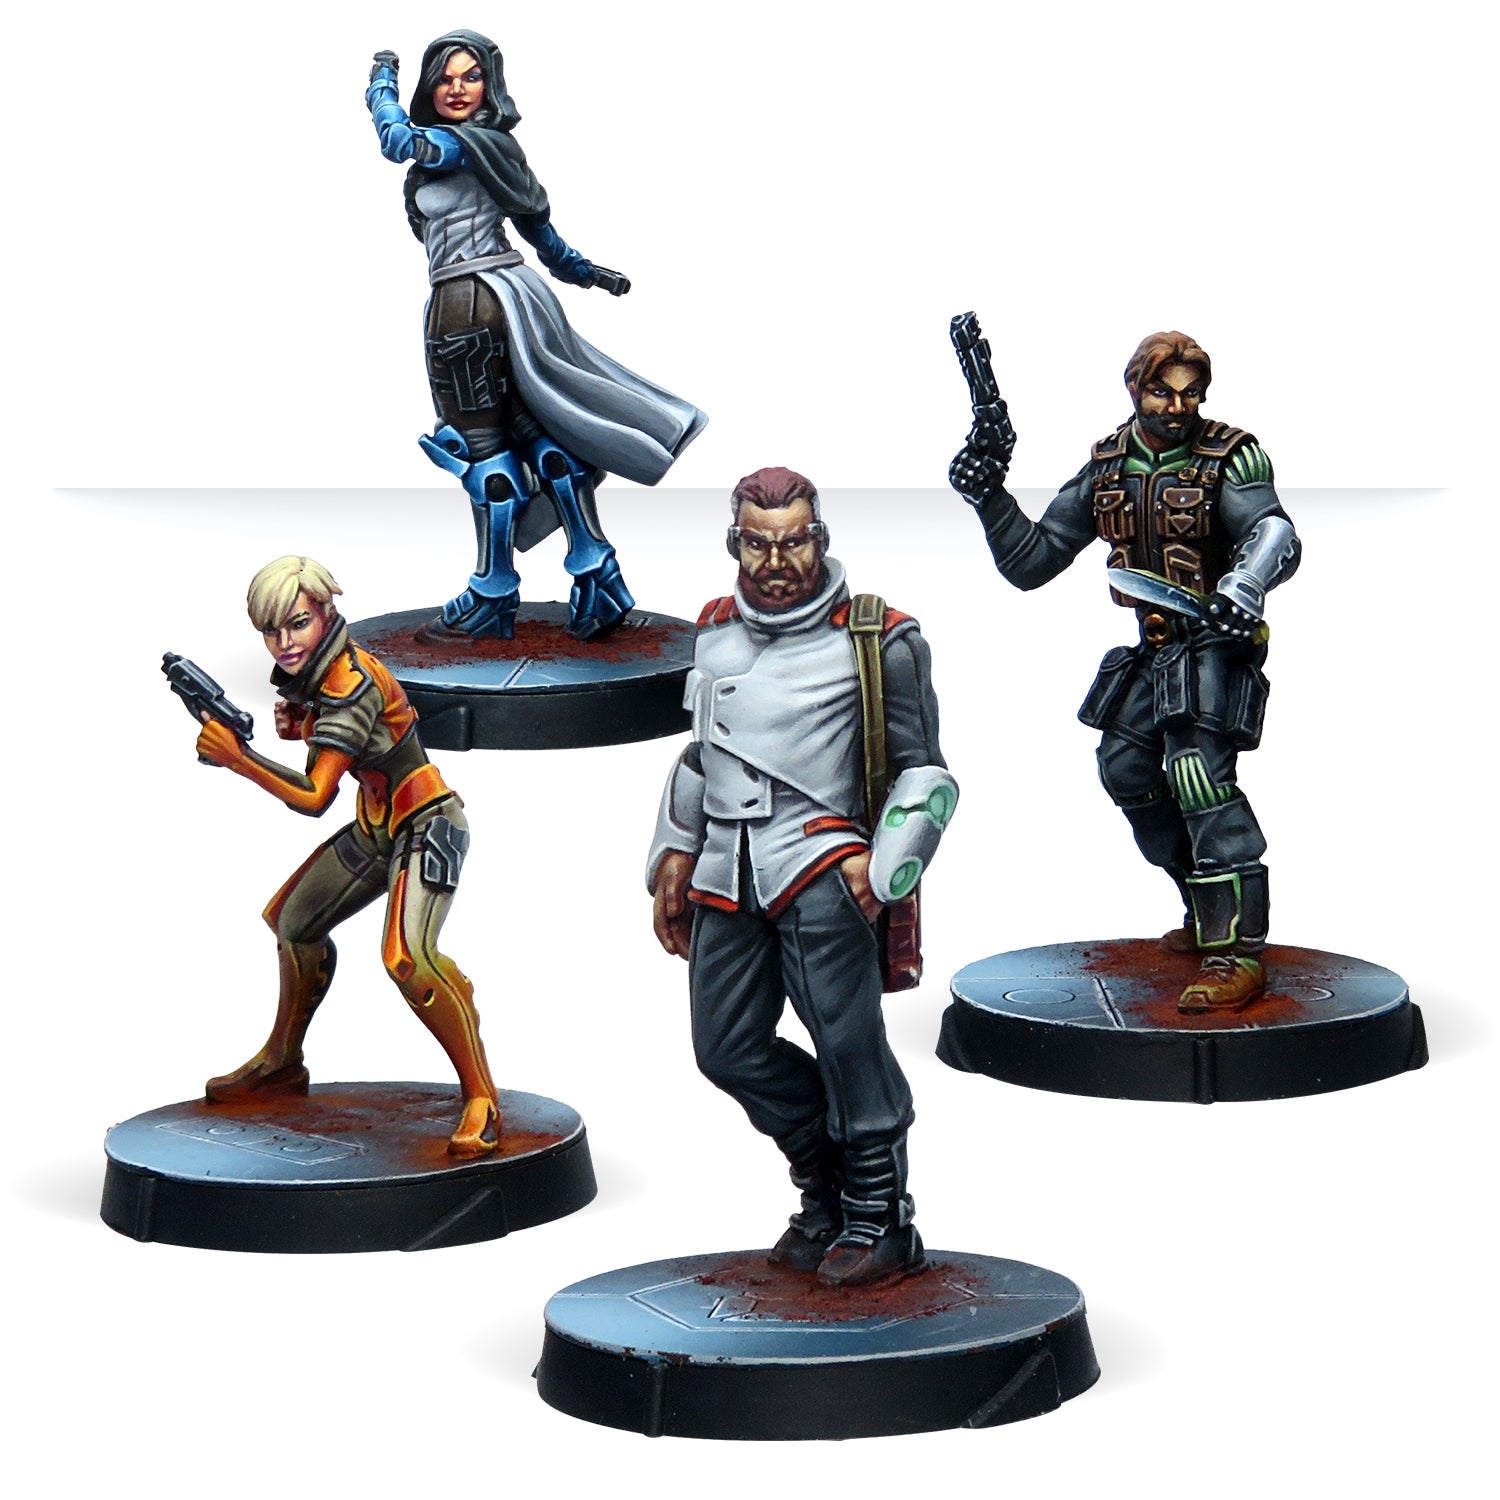 Agents of the Human Sphere. RPG Characters set box